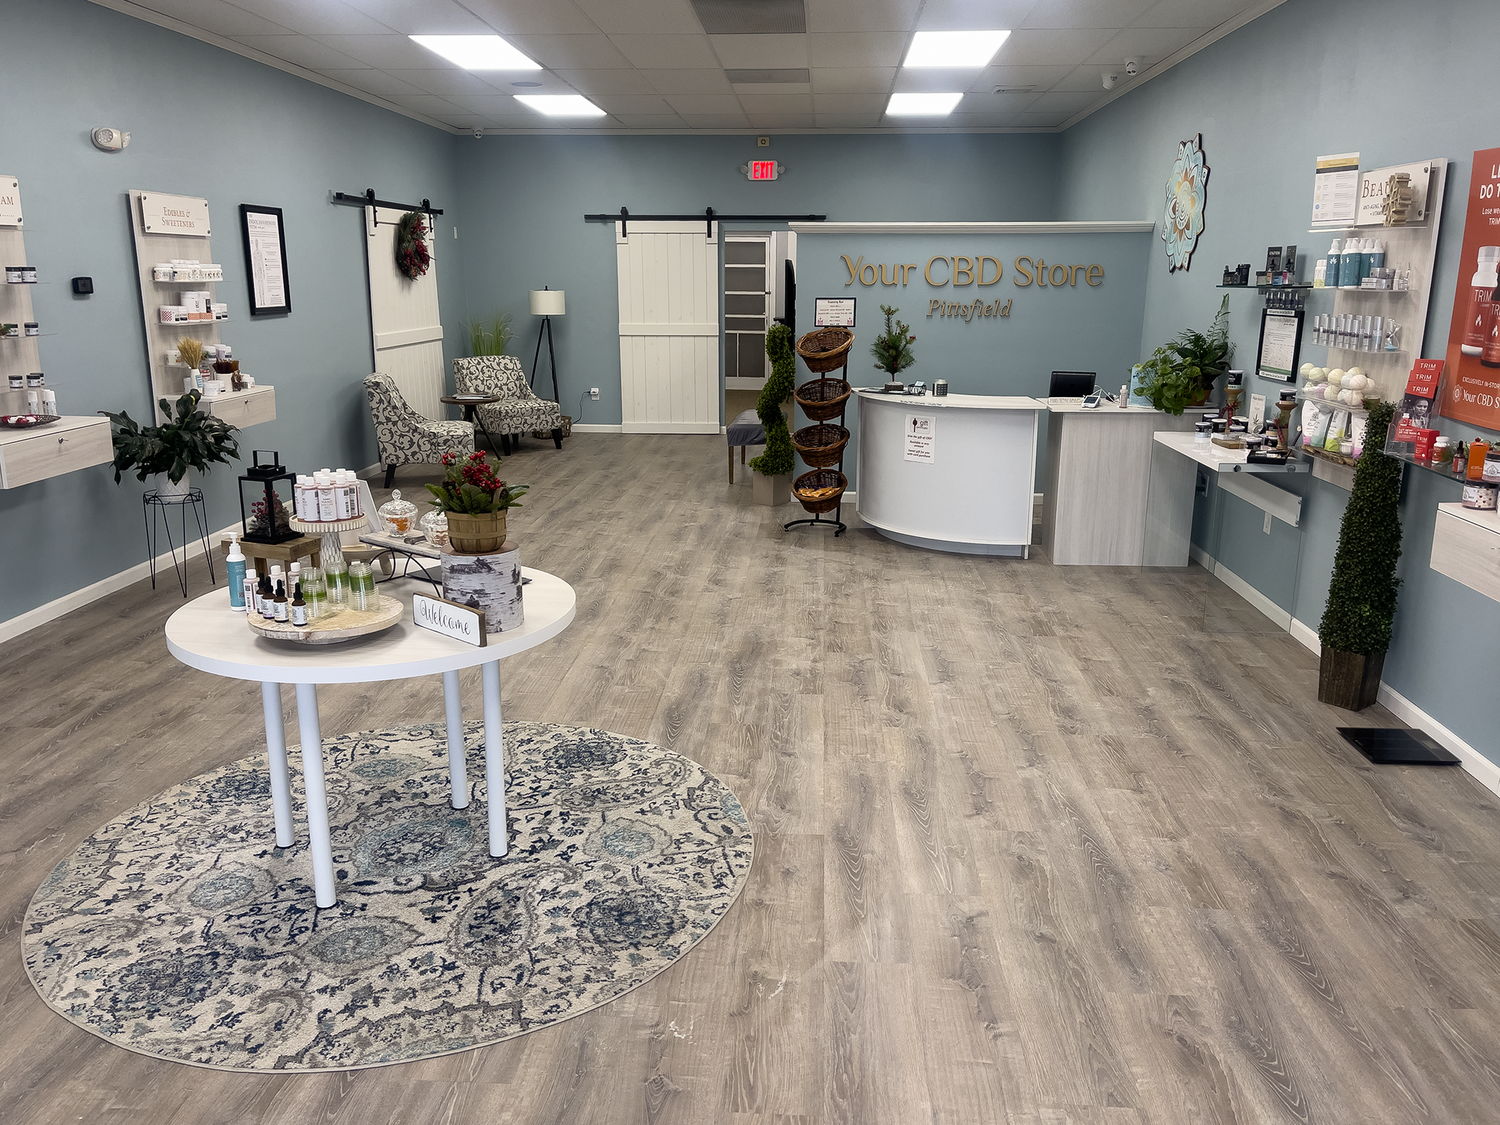 Inside Your CBD Store Pittsfield MA